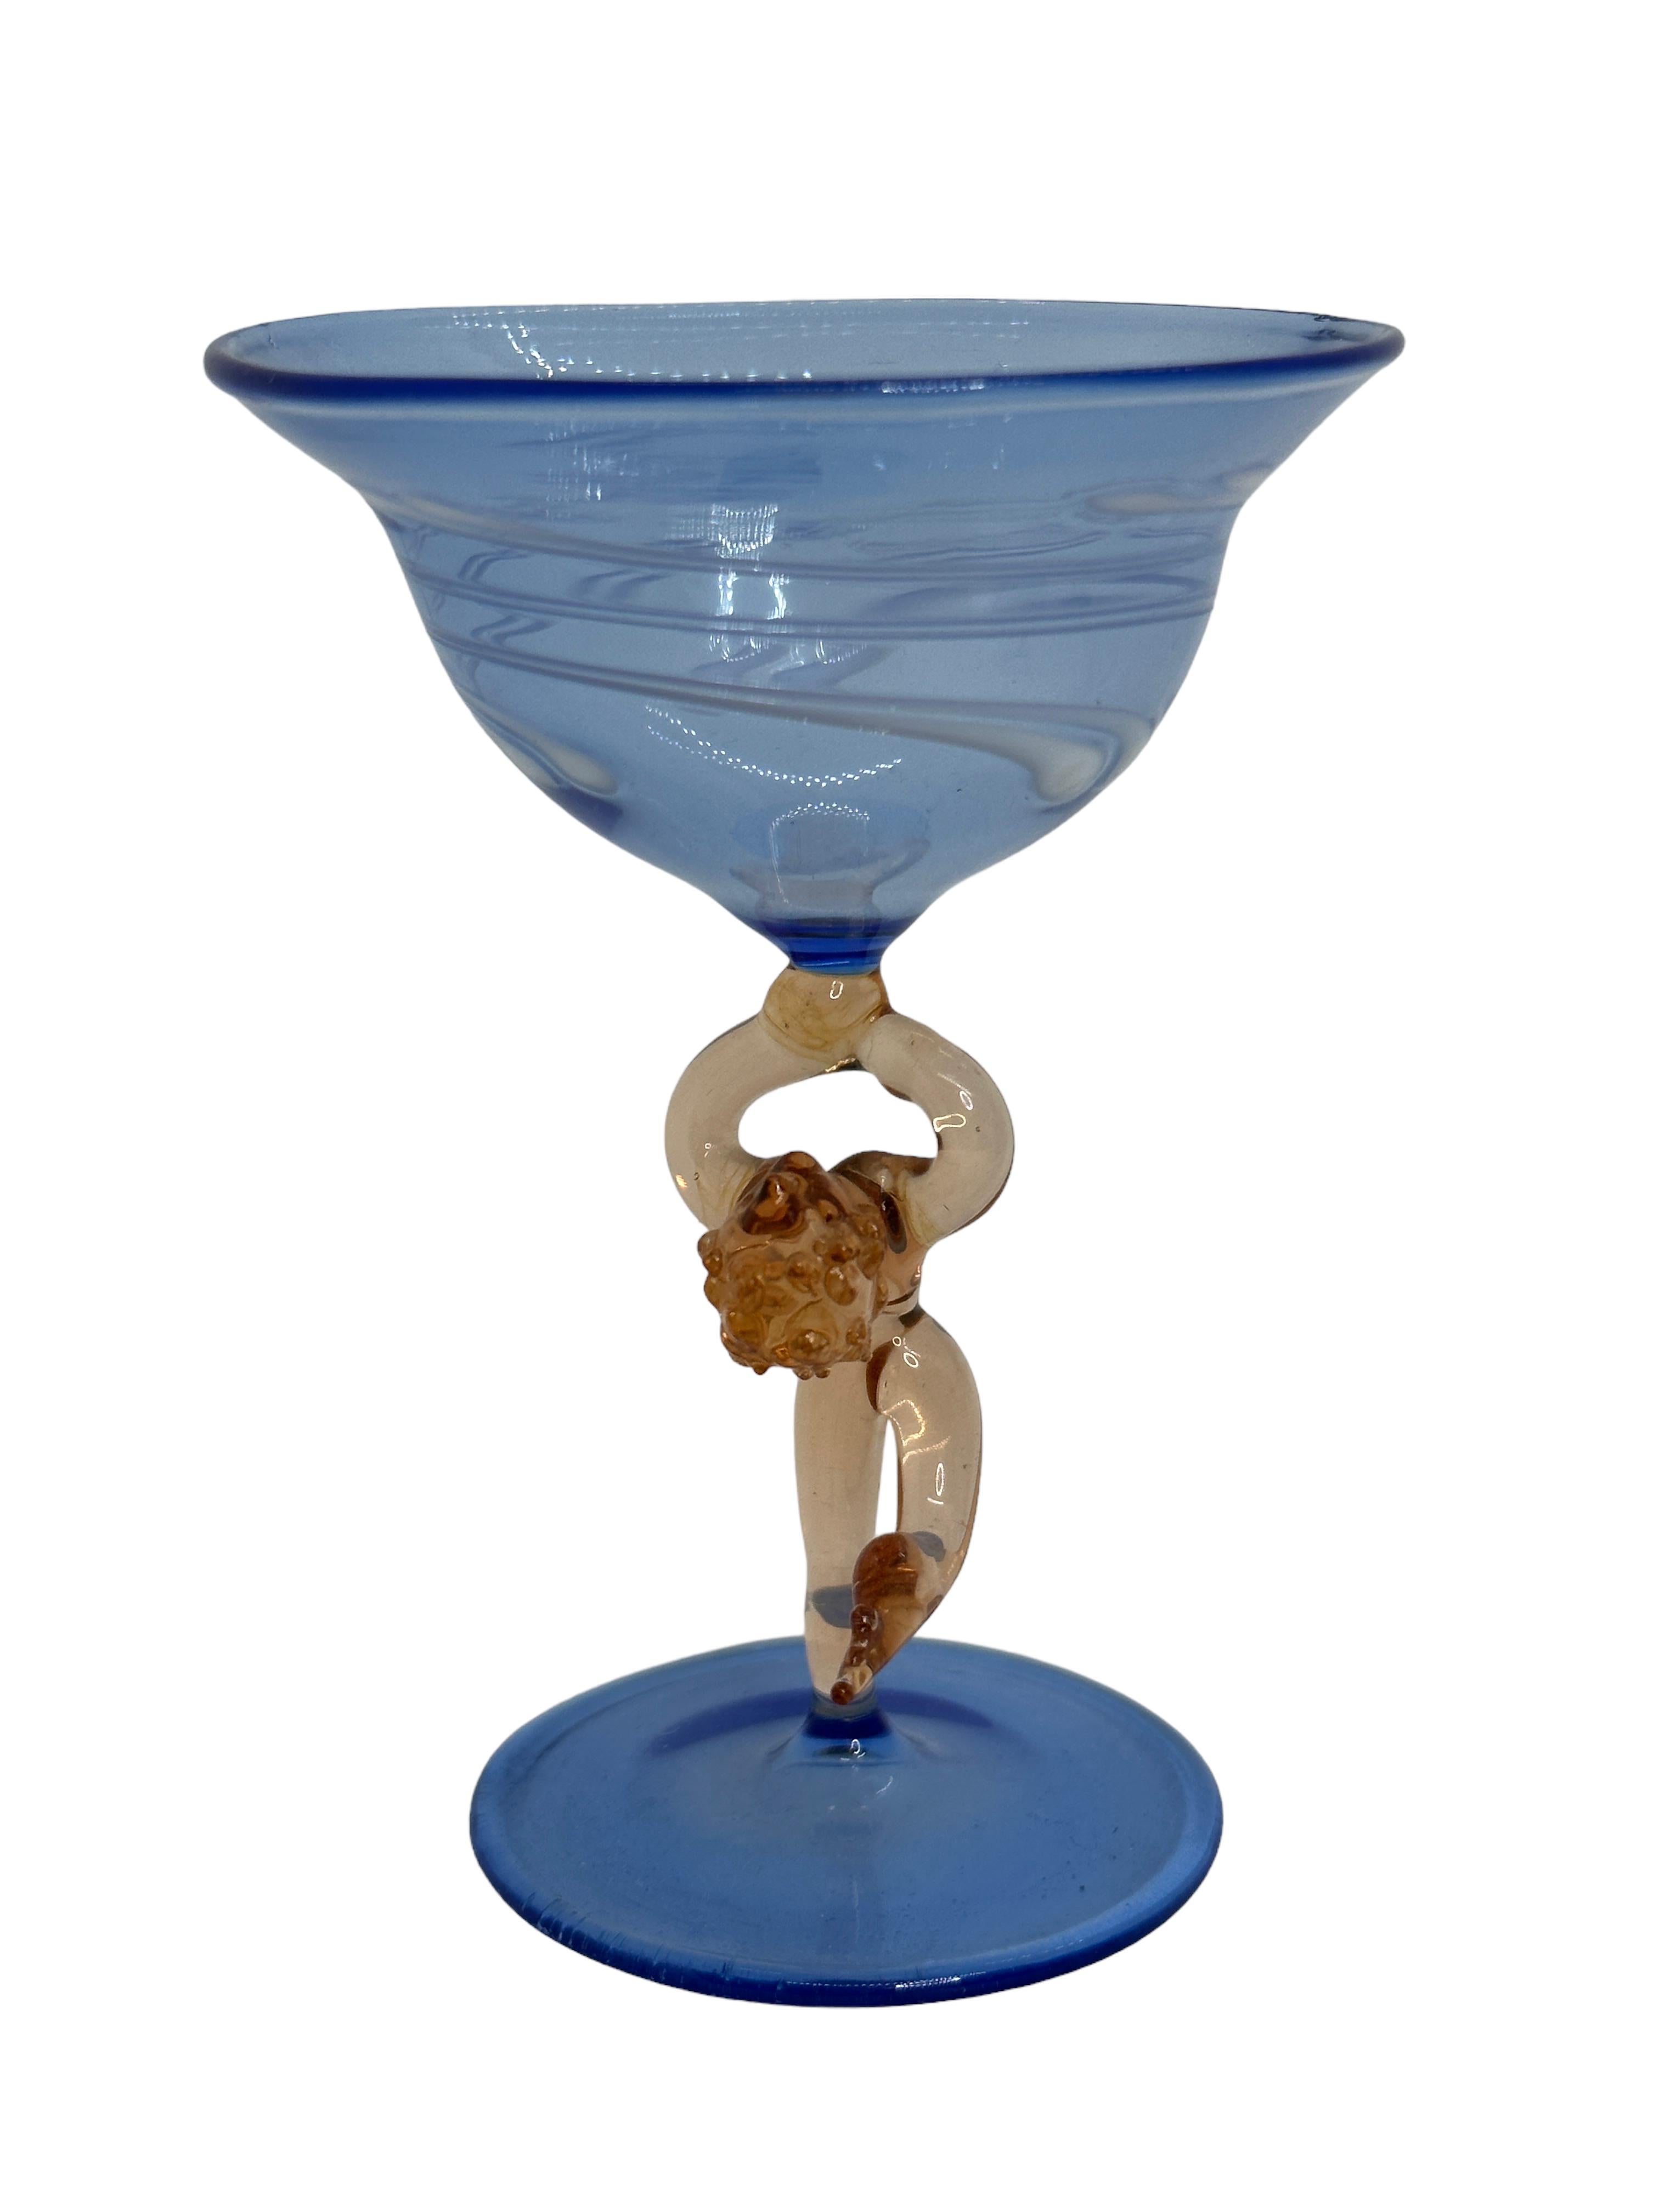 This is a beautiful single vintage stemmed cocktail glass from Austria. It features a bare women's shaft and is in Bimini art style. The blue glass has an embossed design, the stem is a naked lady in pinkish color. The base is a beautiful blue